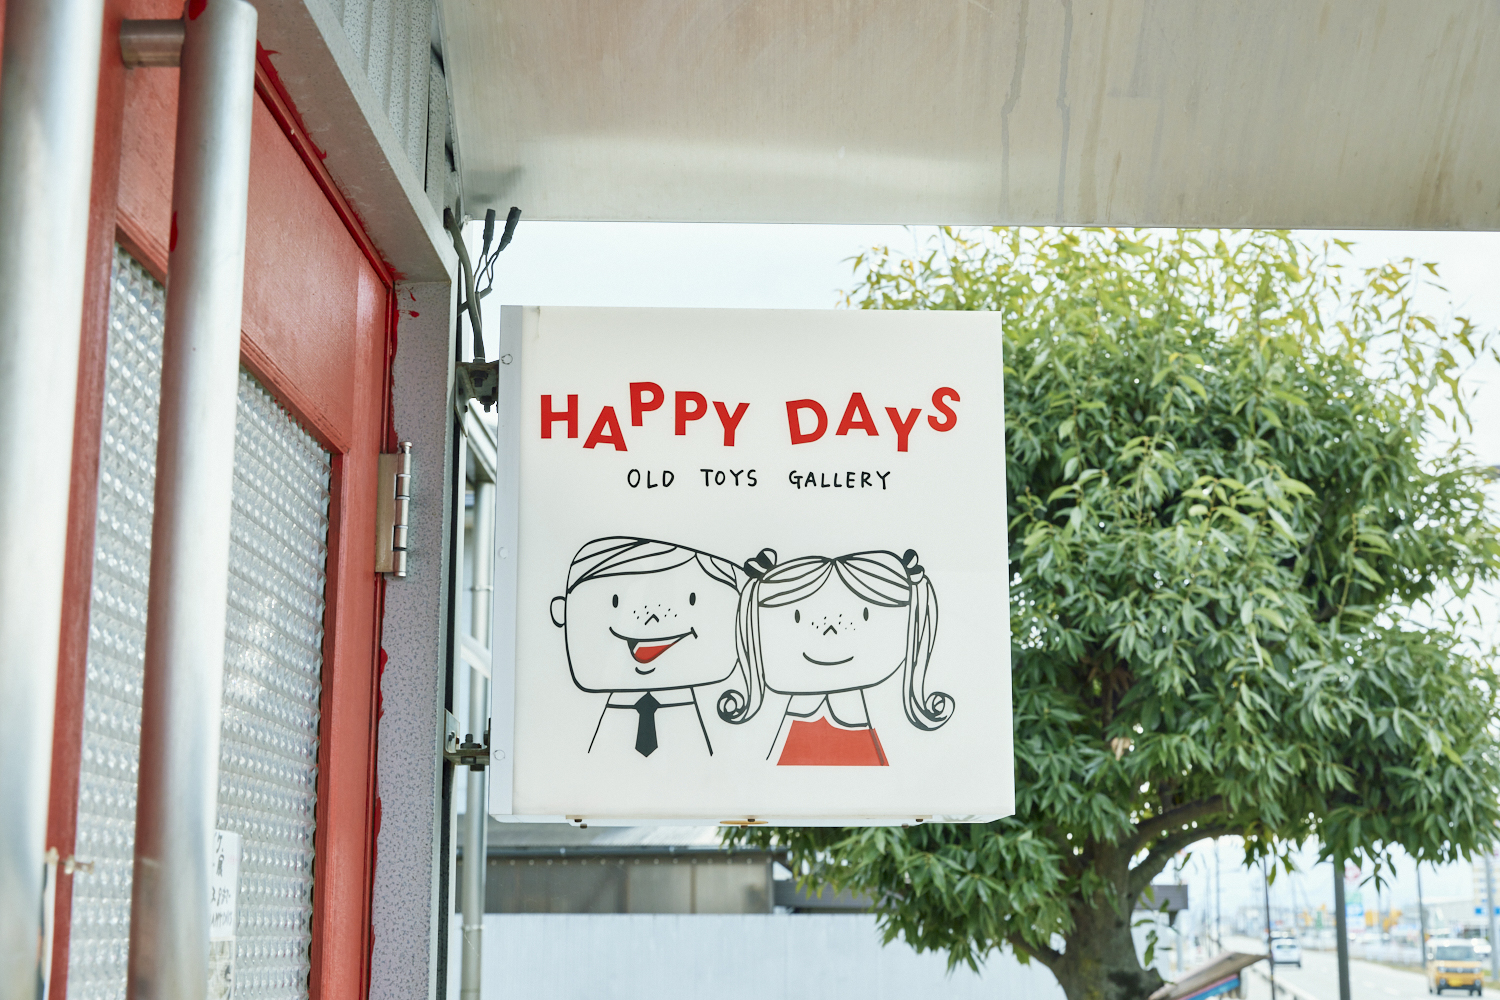 All You Need Is “HAPPY DAYS”！